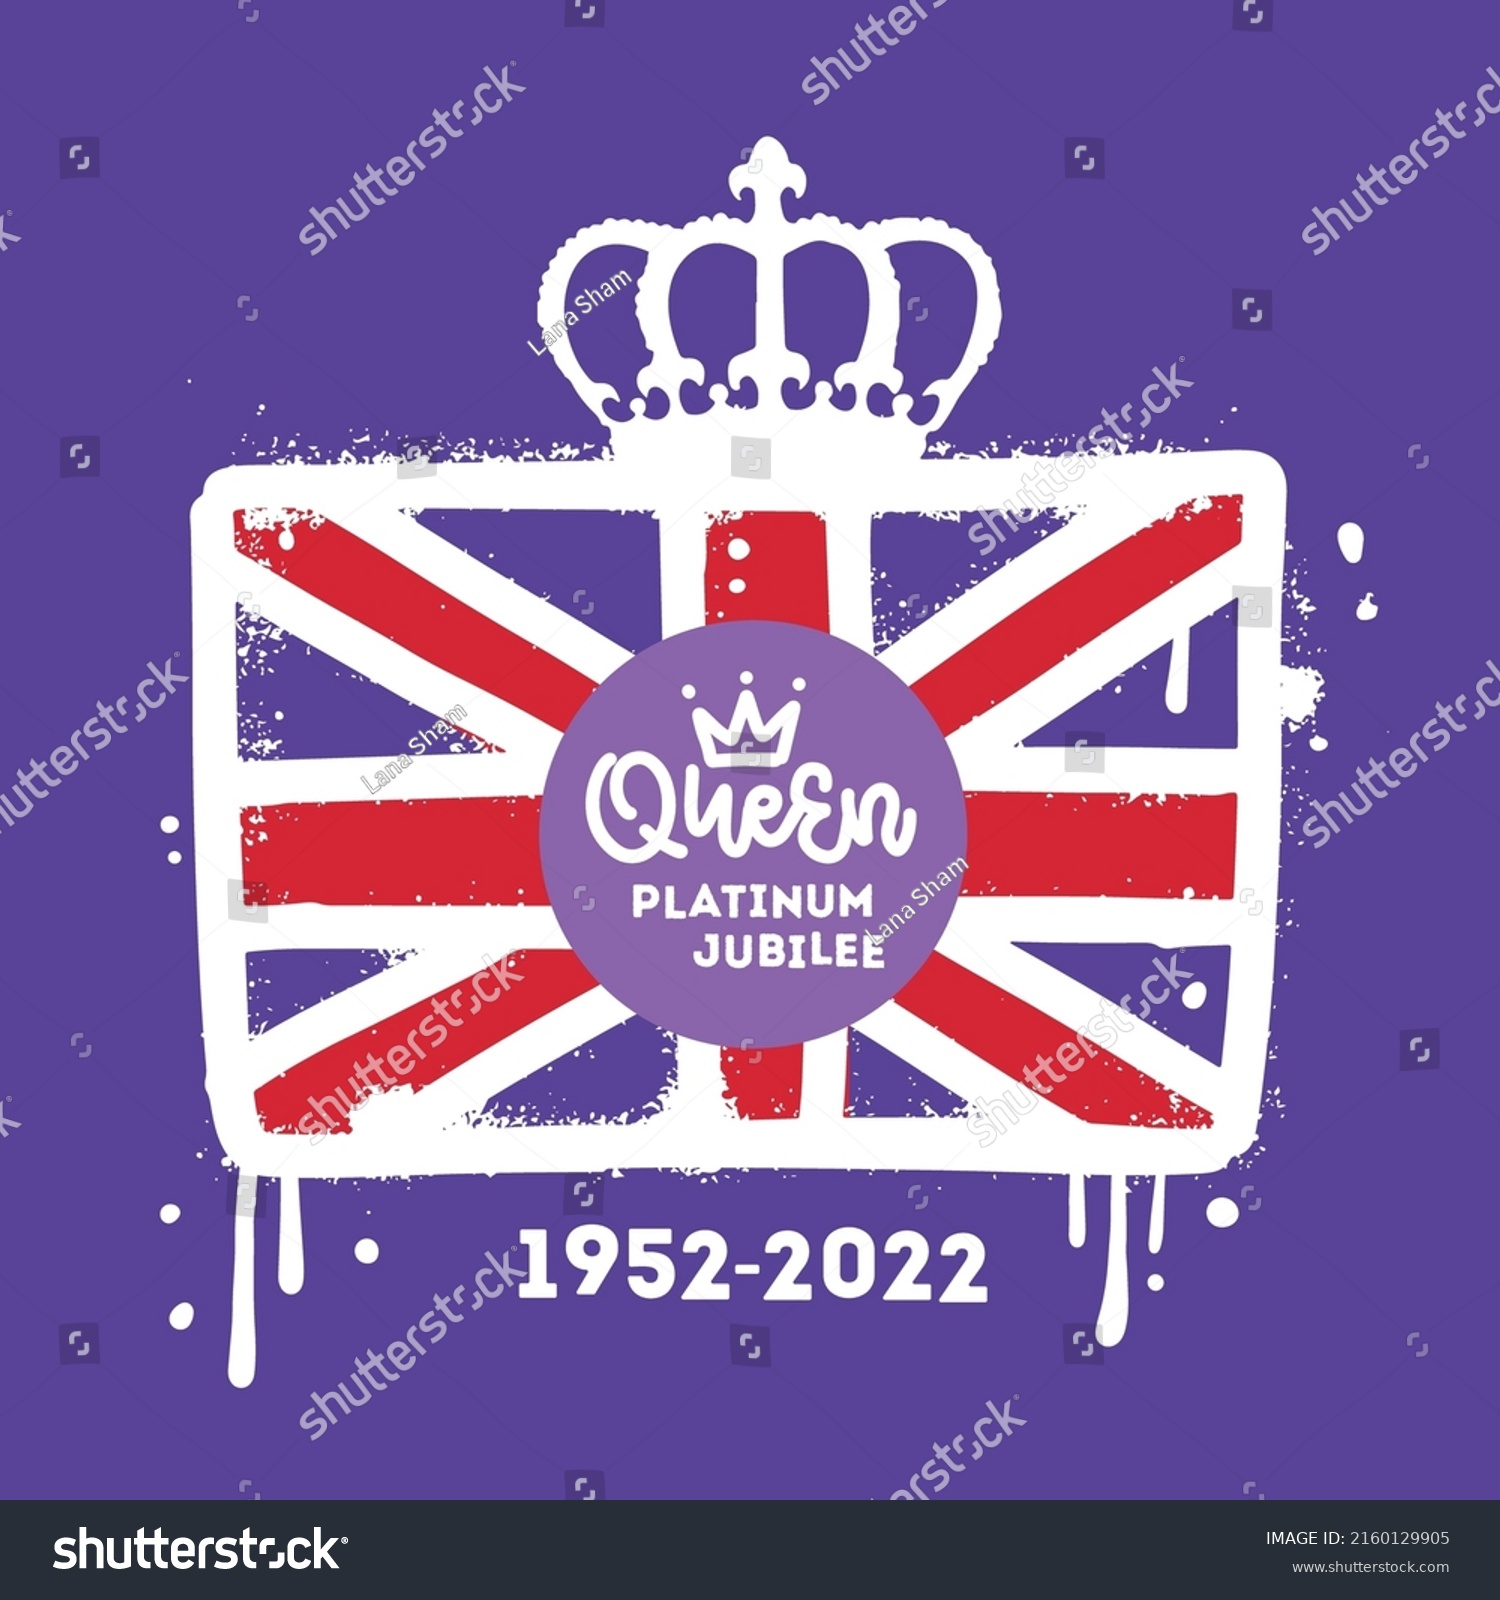 SVG of The Queen's Platinum Jubilee celebration coonept with the Union Jack, crown and text. 1952-2022. Urban graffiti style with splashes and drops. Vector textured hand drawn illustration svg